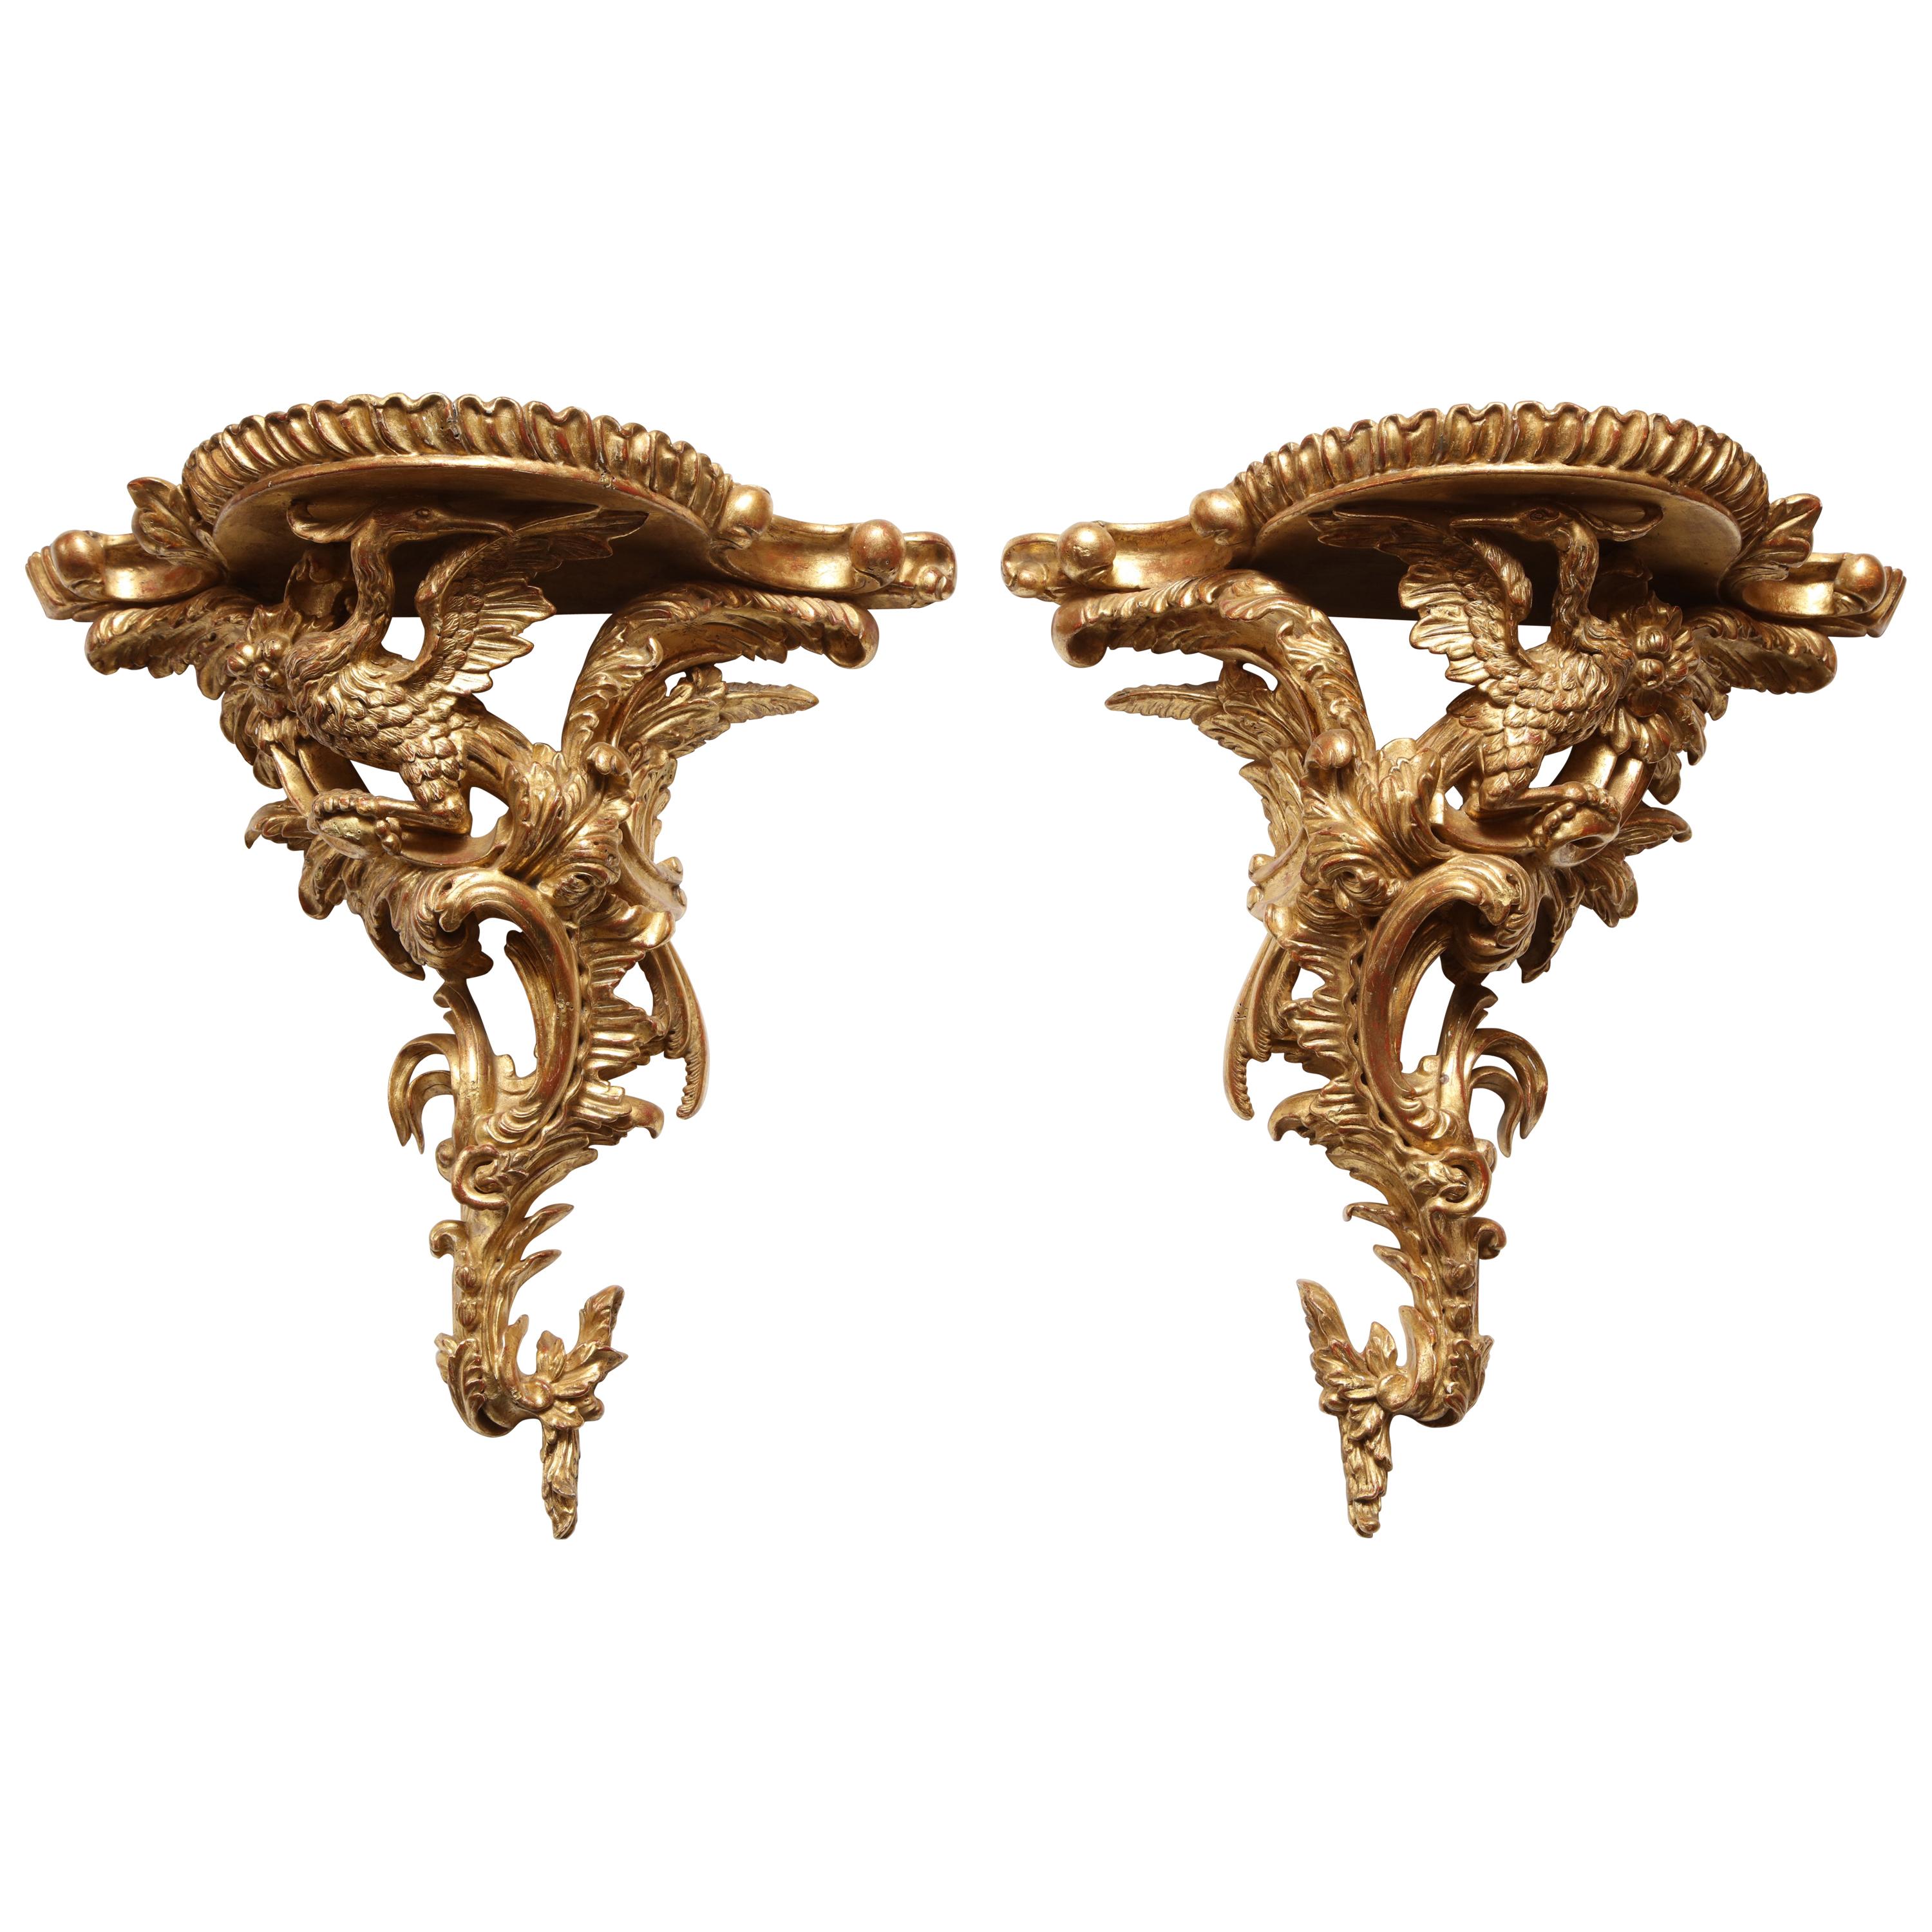 Pair of Carved Giltwood Wall Brackets